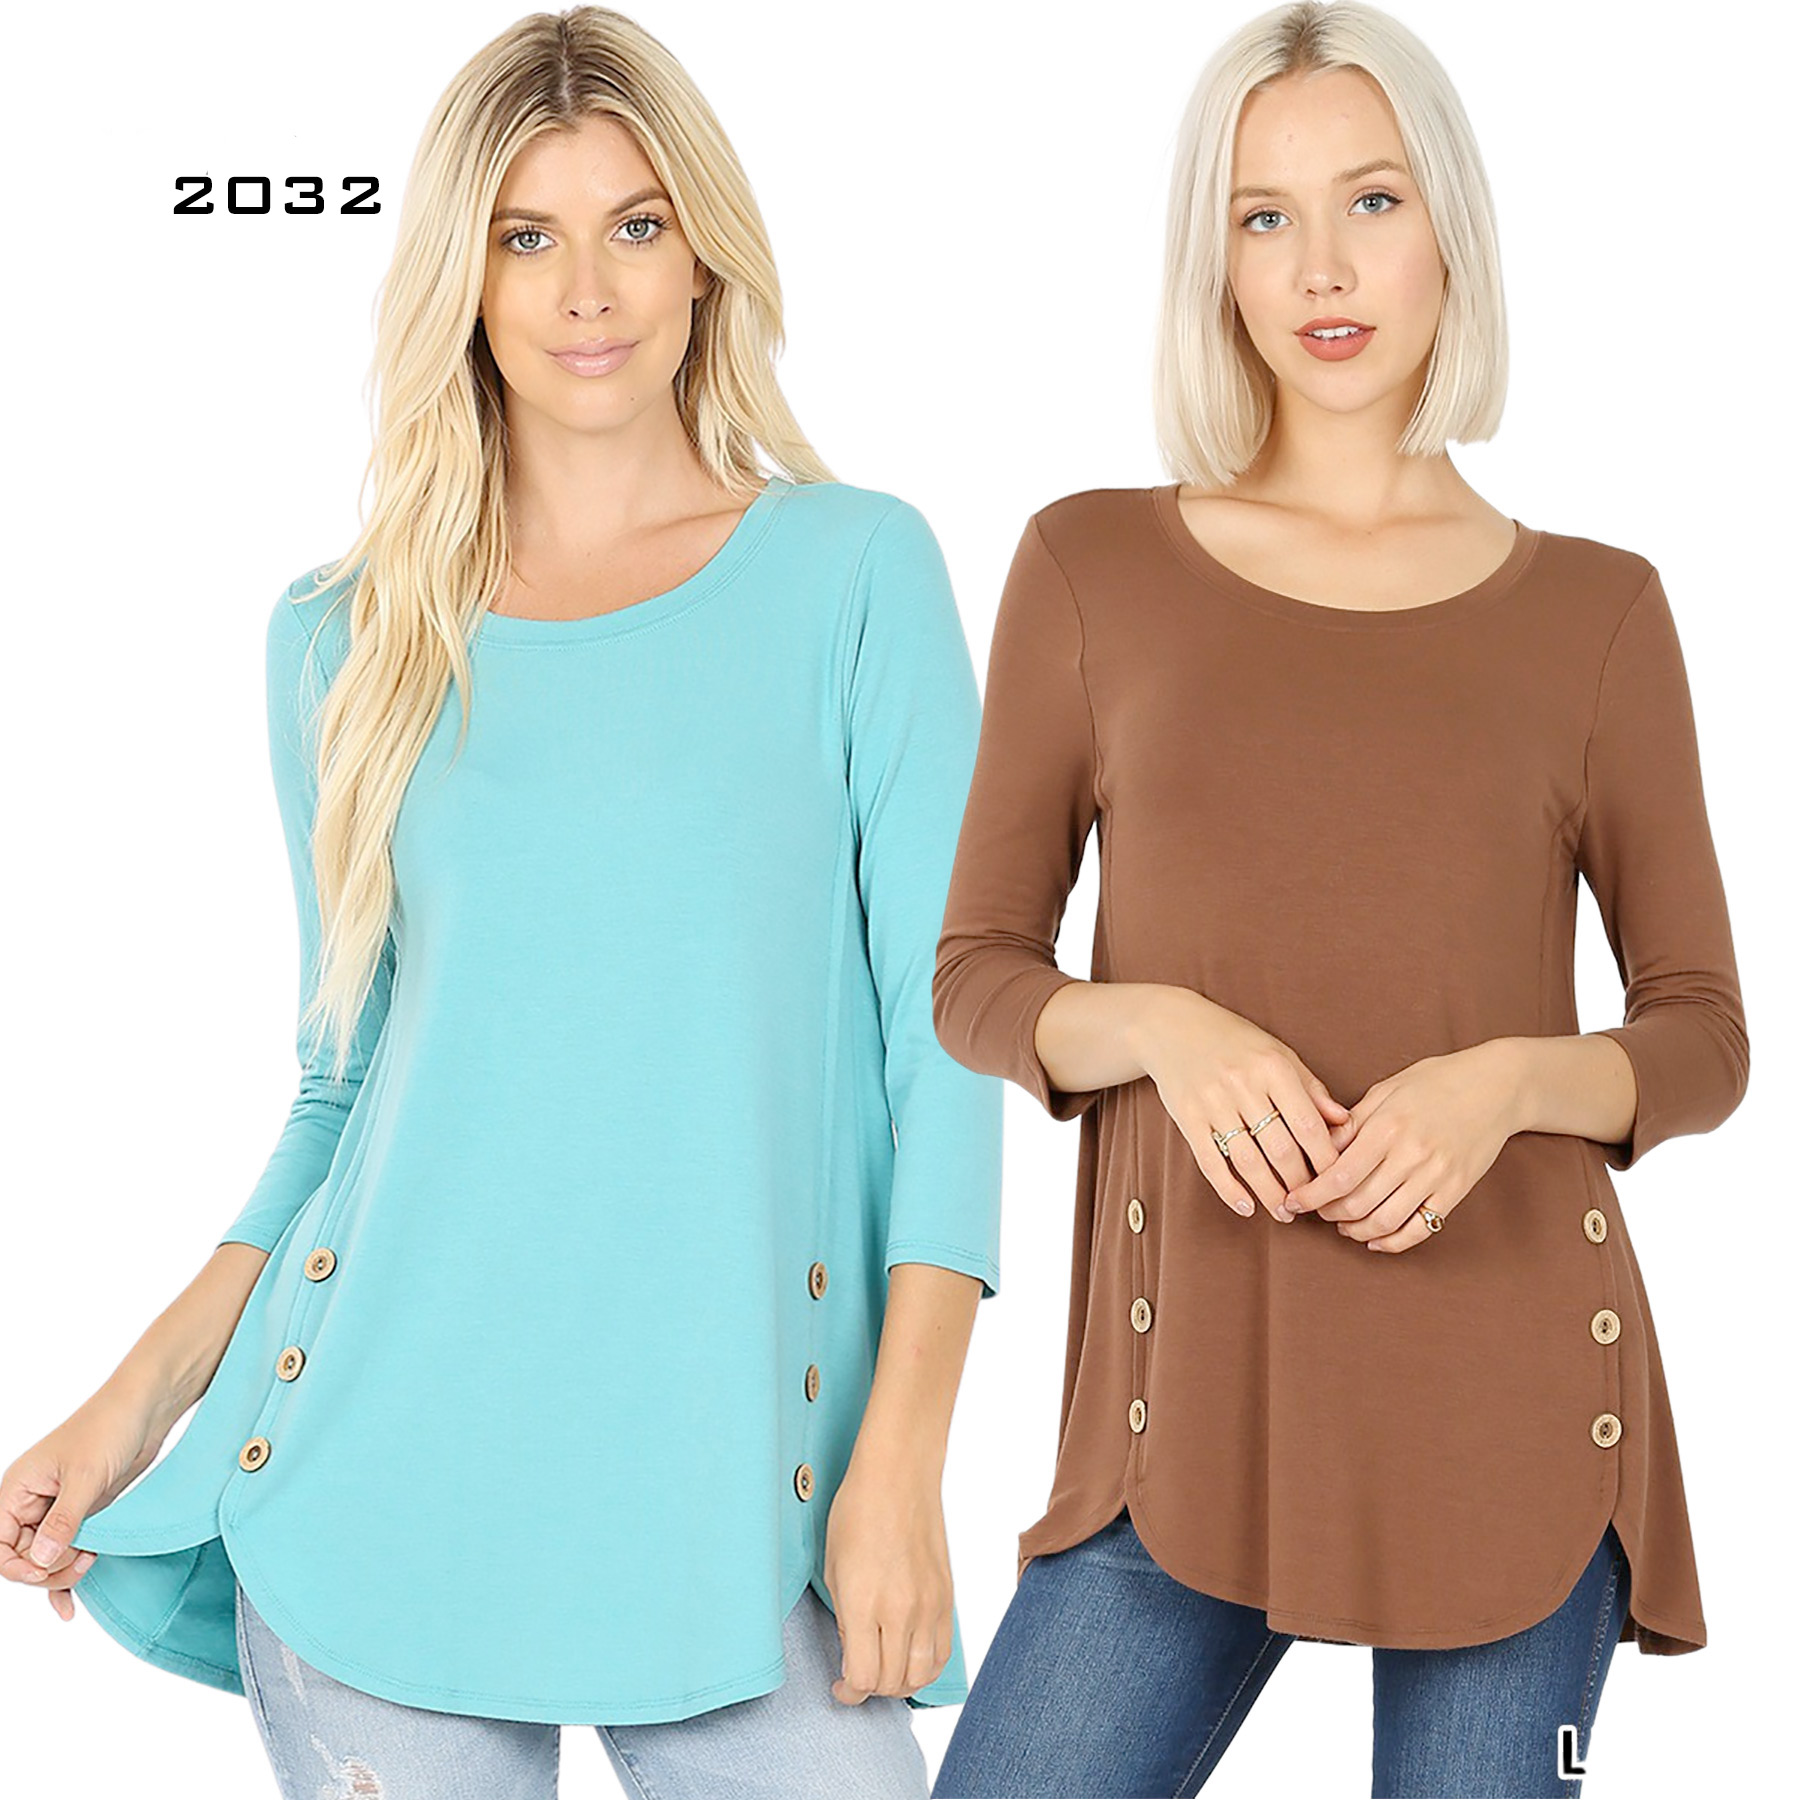 2032 - 3/4 Sleeve Side Wood Button Tops